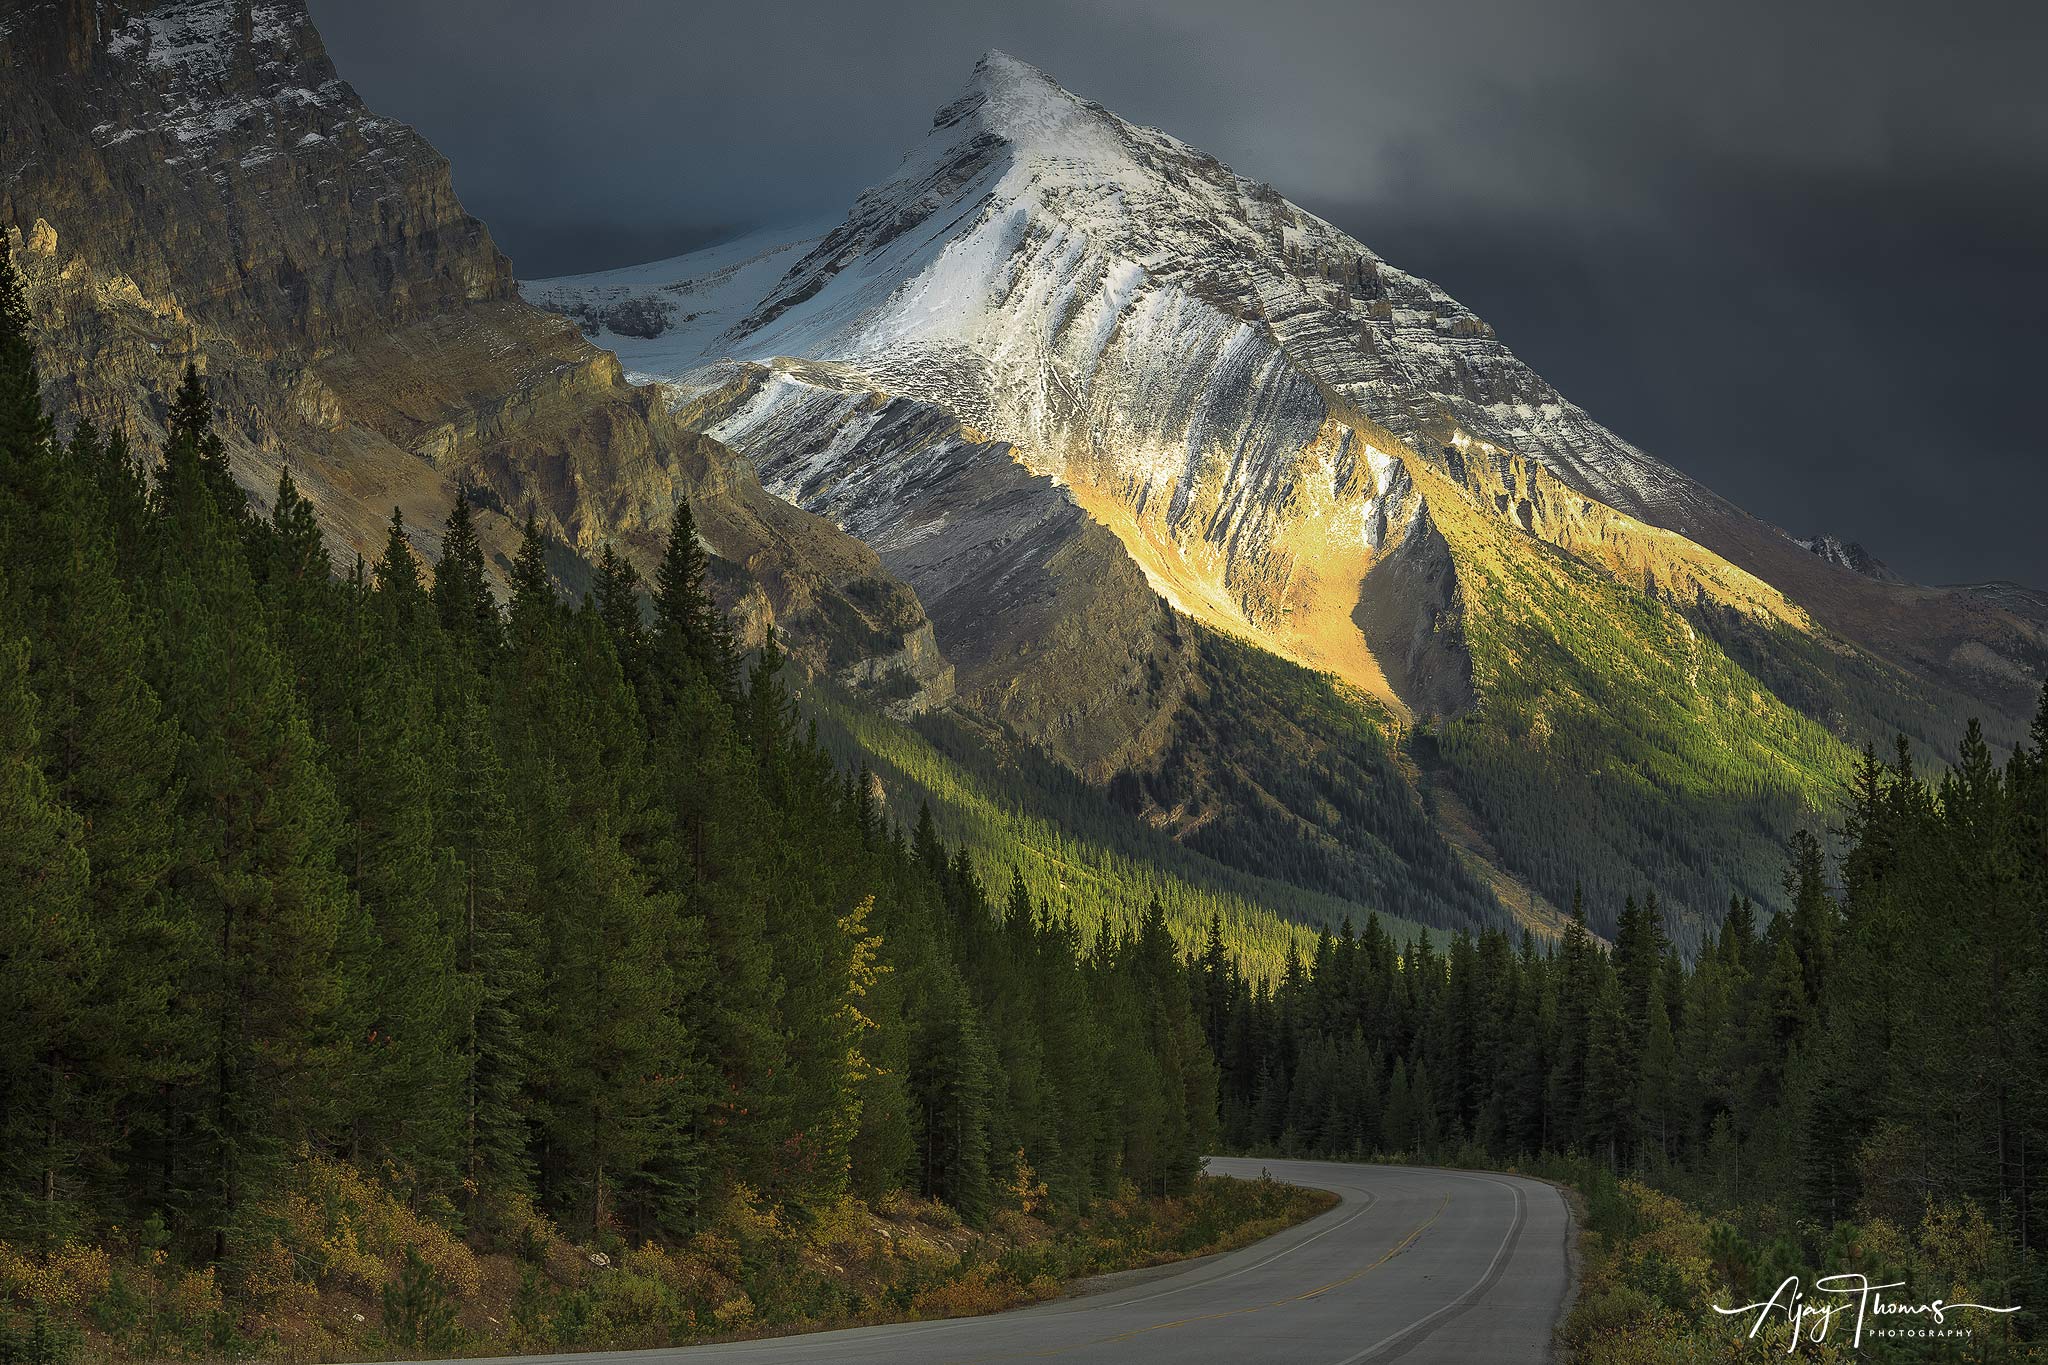 Evening light hitting the mountain in highway 93  on a cloudy evening 
limited edition metal prints for sale